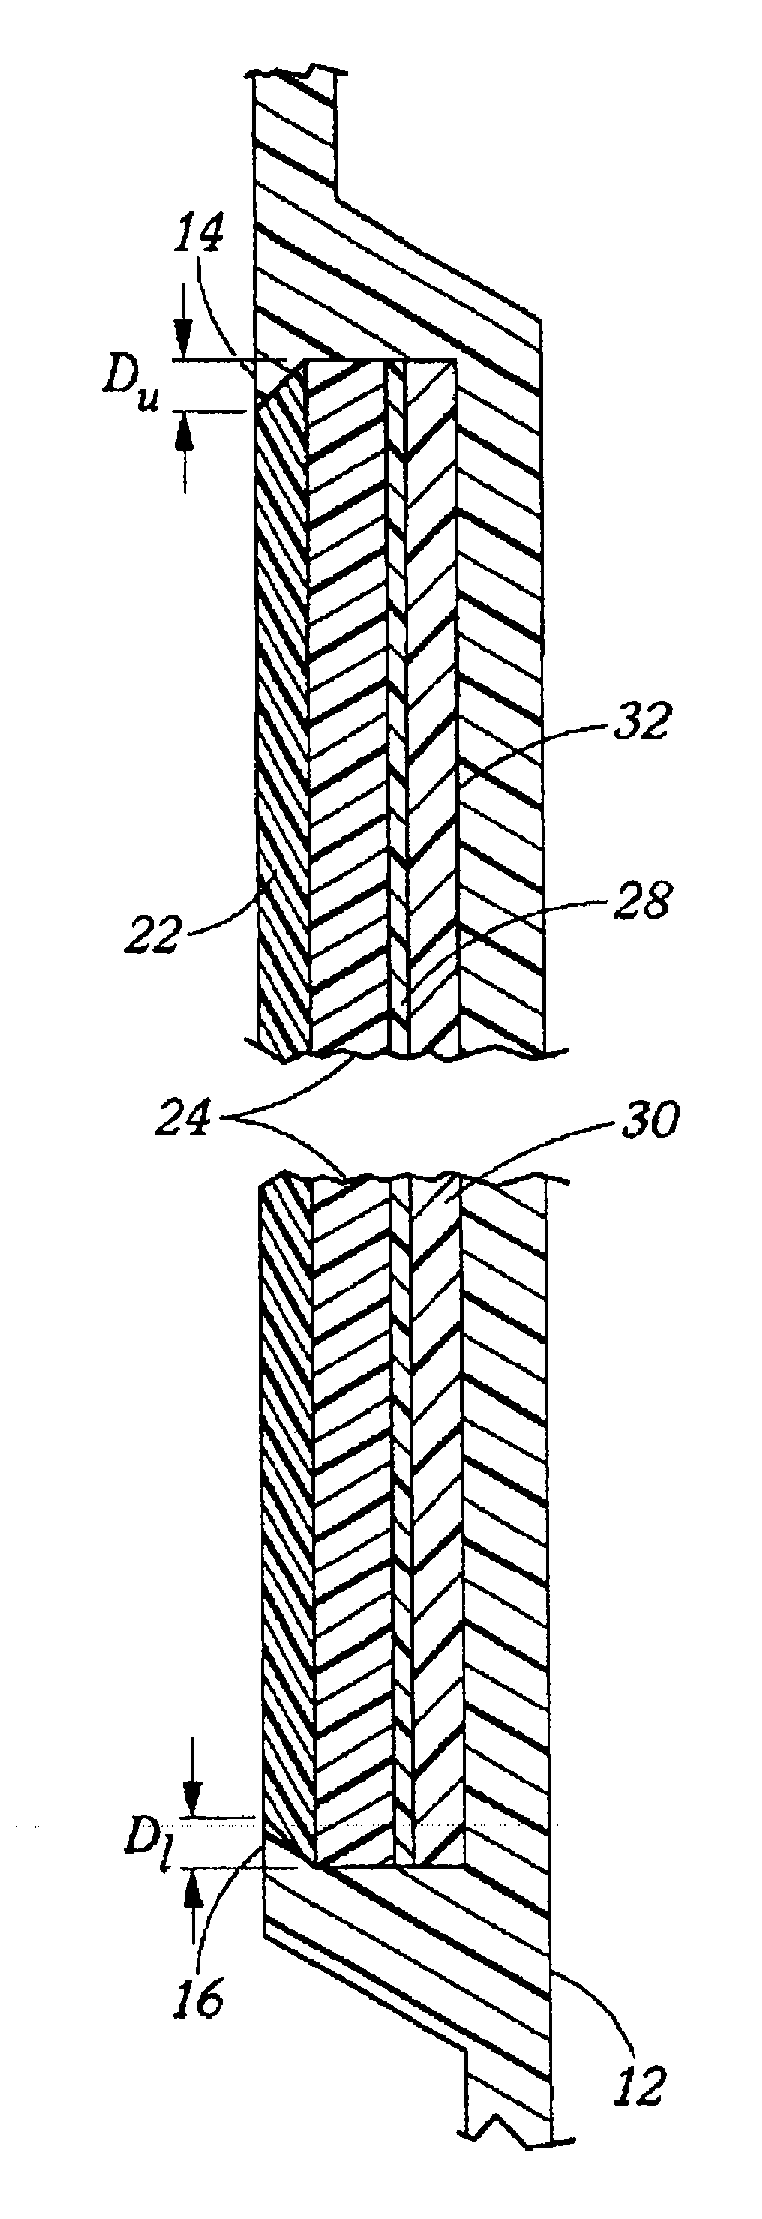 Methods of manufacturing plastic objects having bonded lenticular lens-sheets